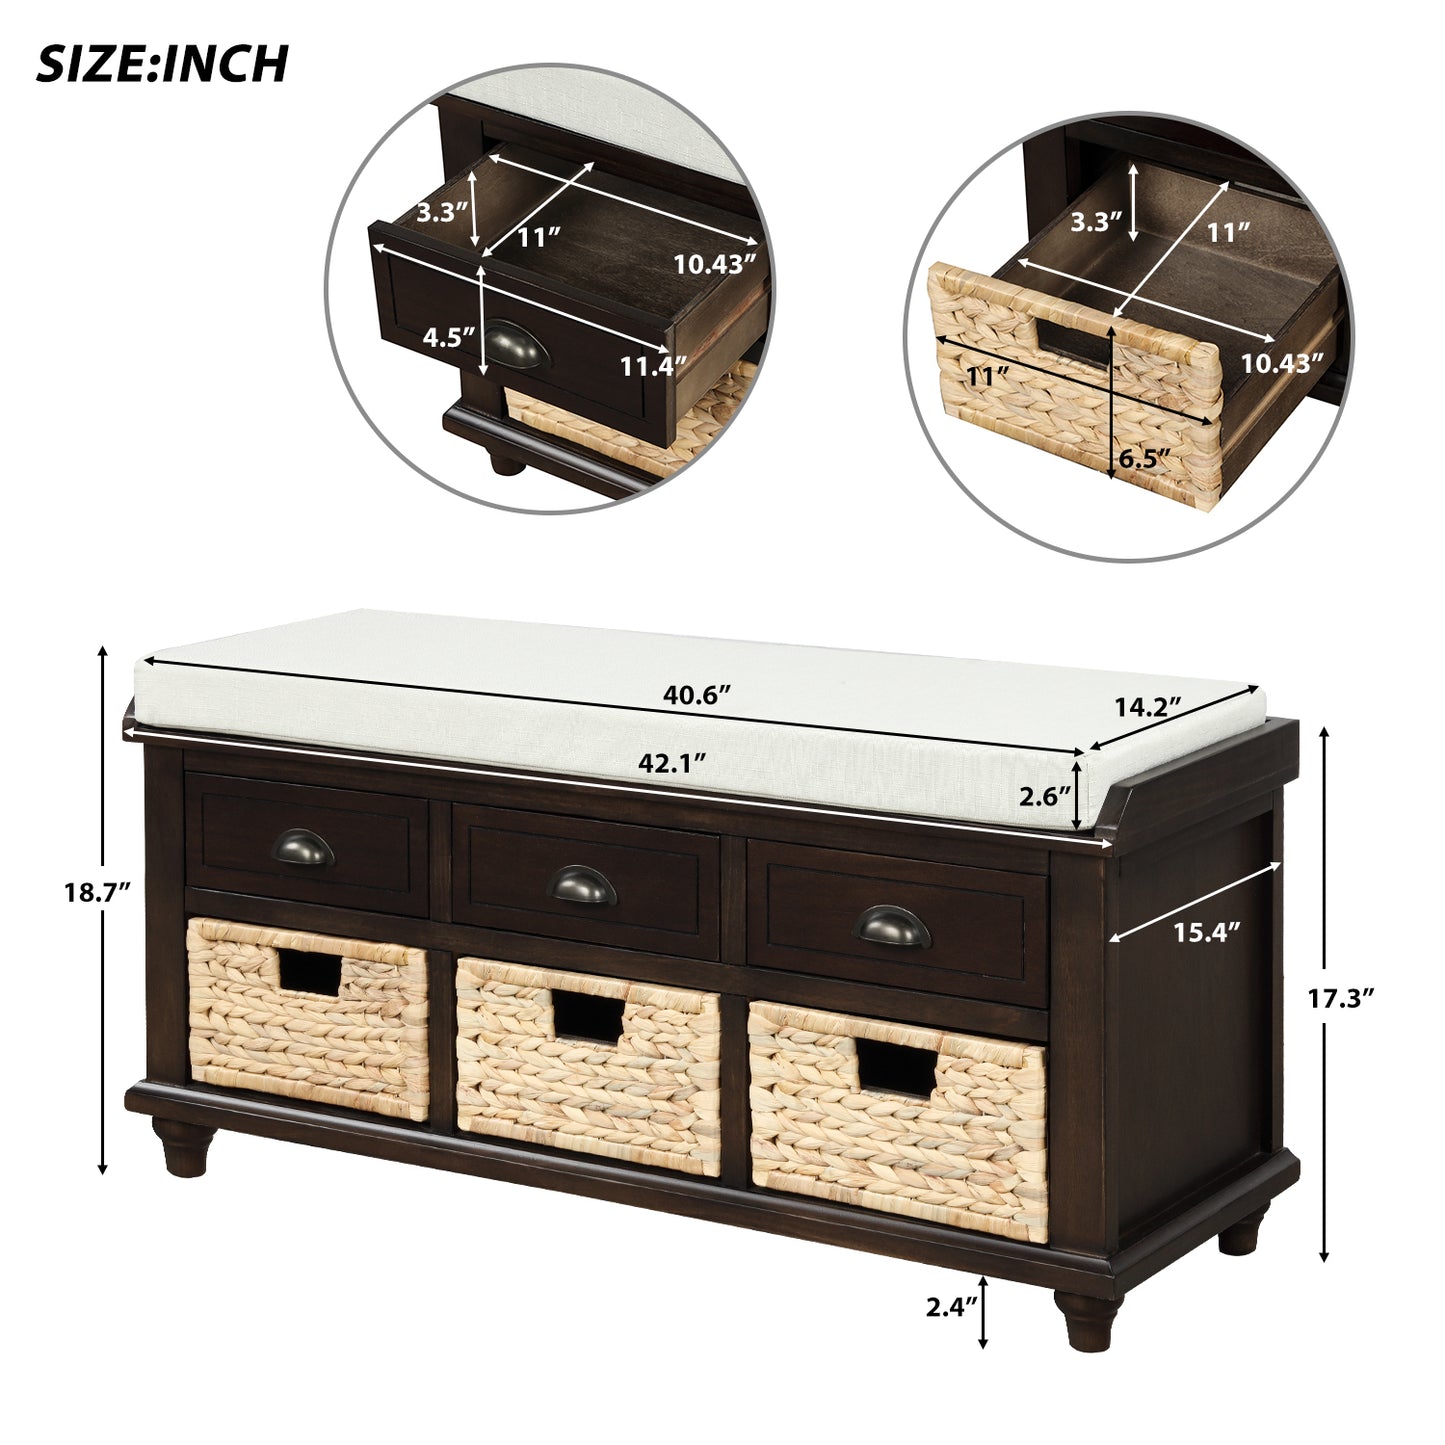 TREXM Rustic Storage Bench with 3 Drawers and 3 Rattan Baskets - Espresso